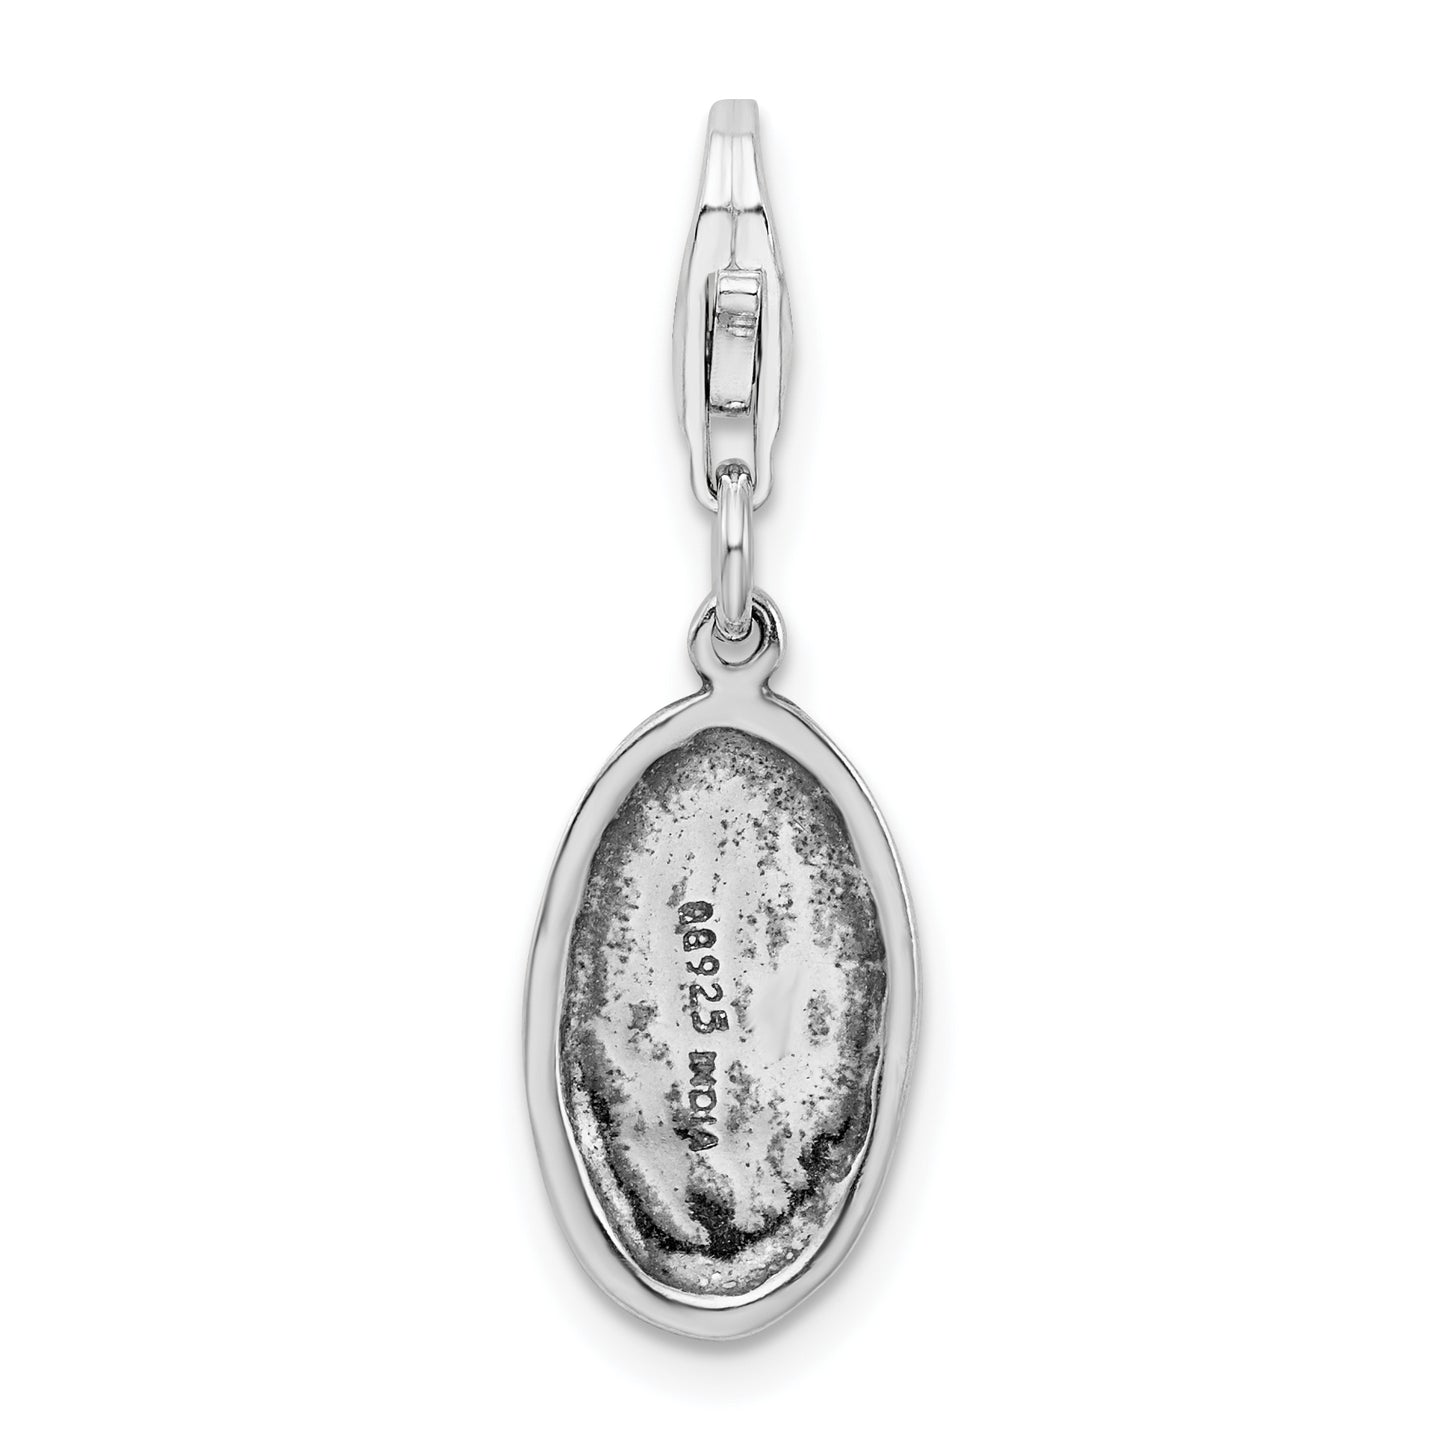 Amore La Vita Sterling Silver Rhodium-plated Polished Antiqued MOM Charm with Fancy Lobster Clasp